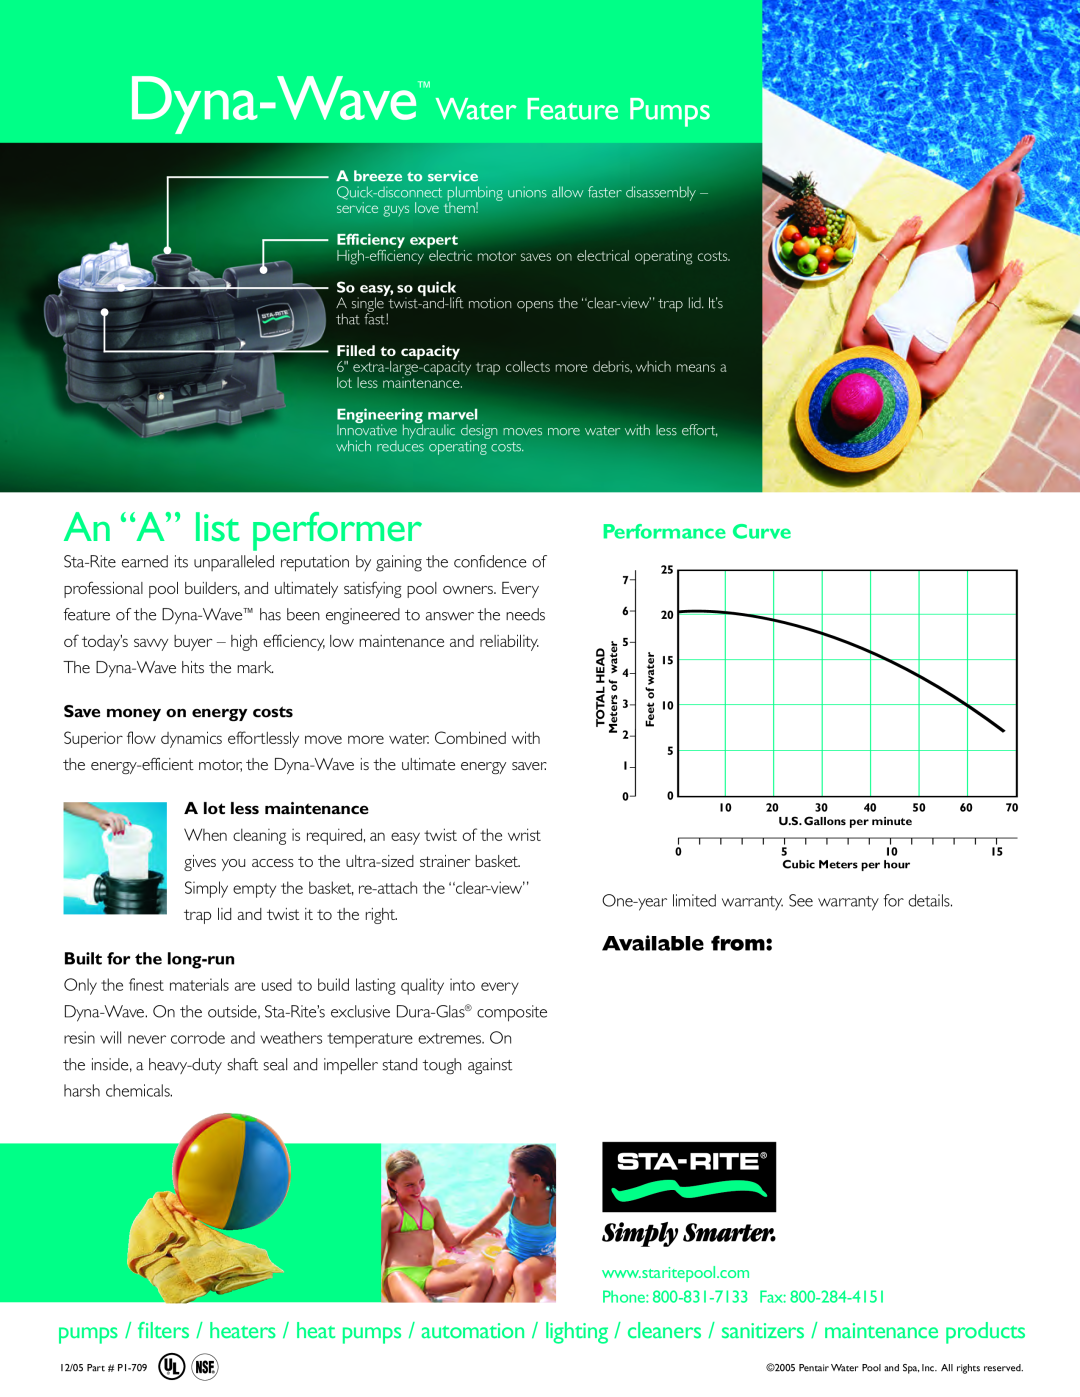 Pentair An “A” list performer, Dyna-Wave Water Feature Pumps, Performance Curve, Available from, A lot less maintenance 